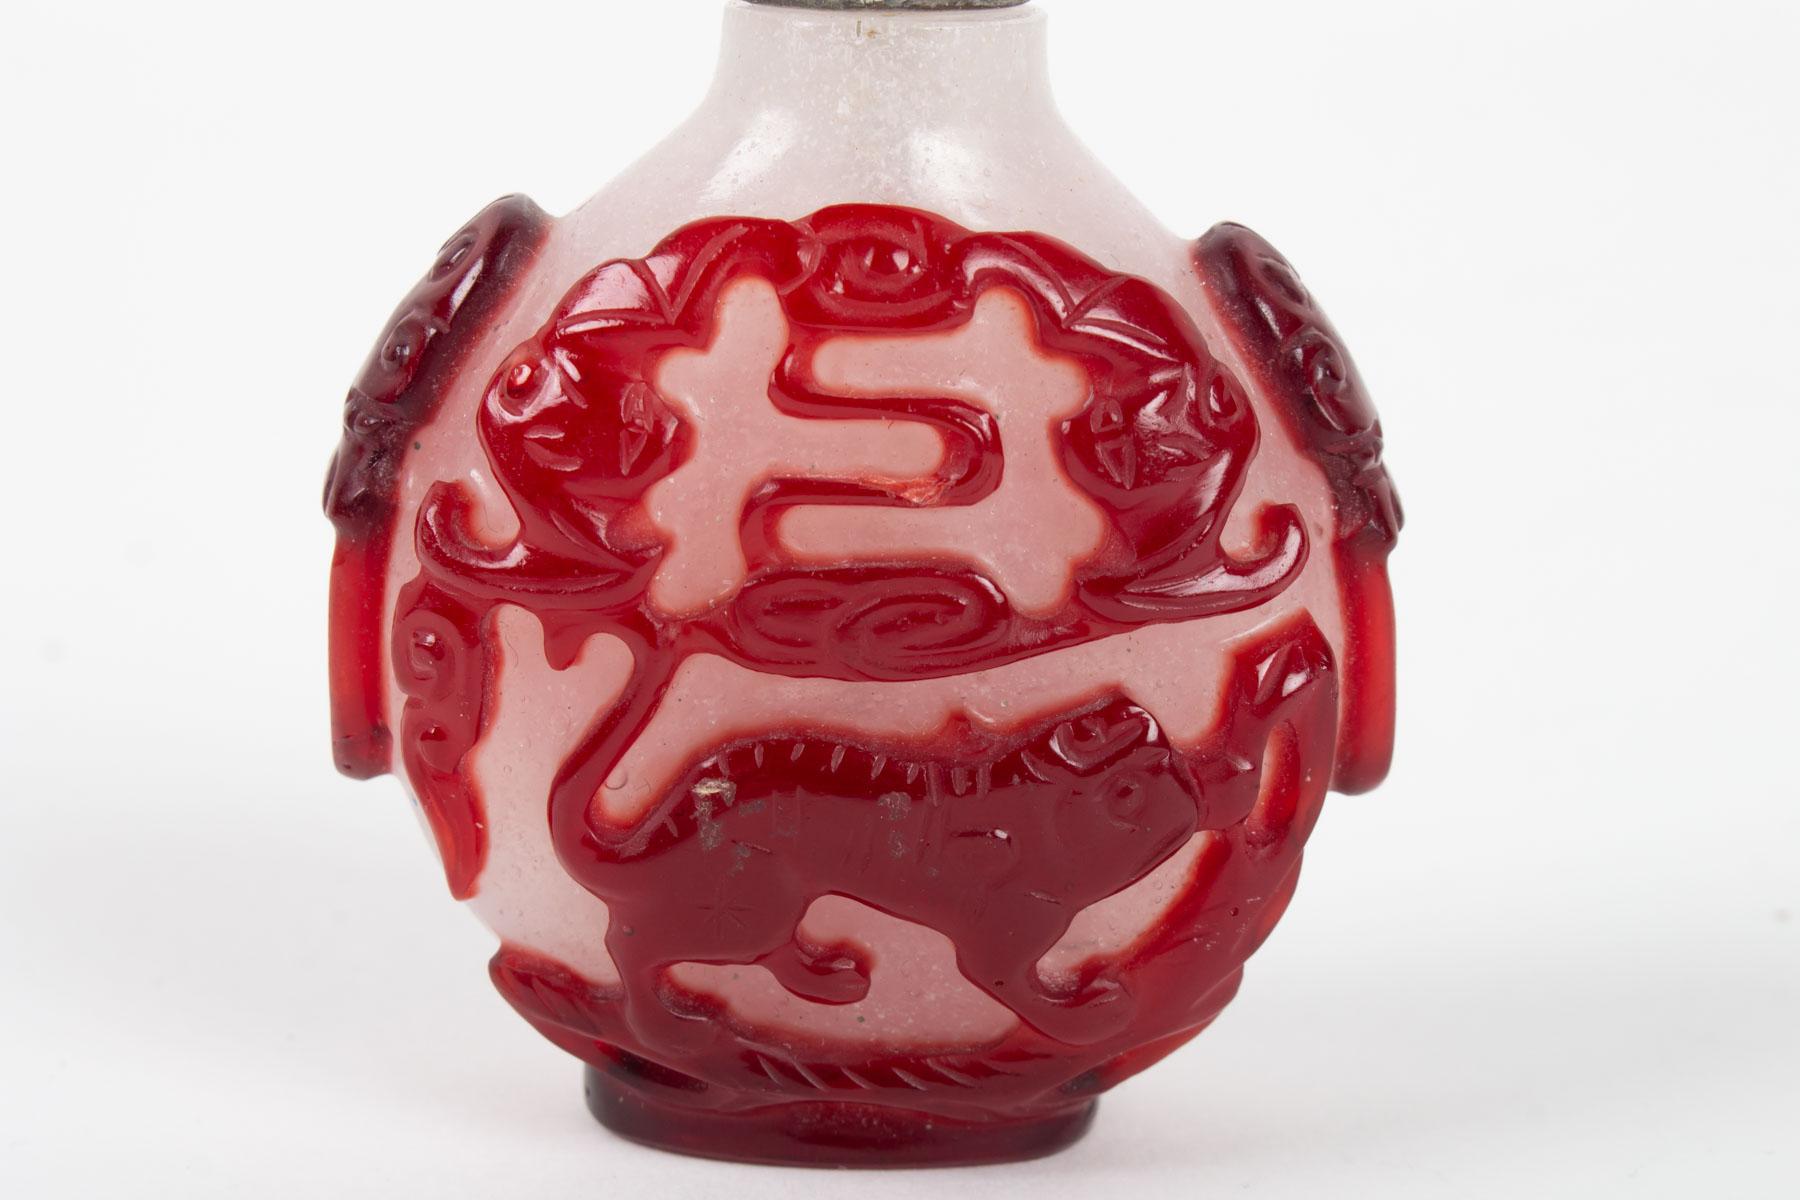 Chinese Glass Snuffbox Overlay White Opaque and Red Blood with Decoration of a Dragon